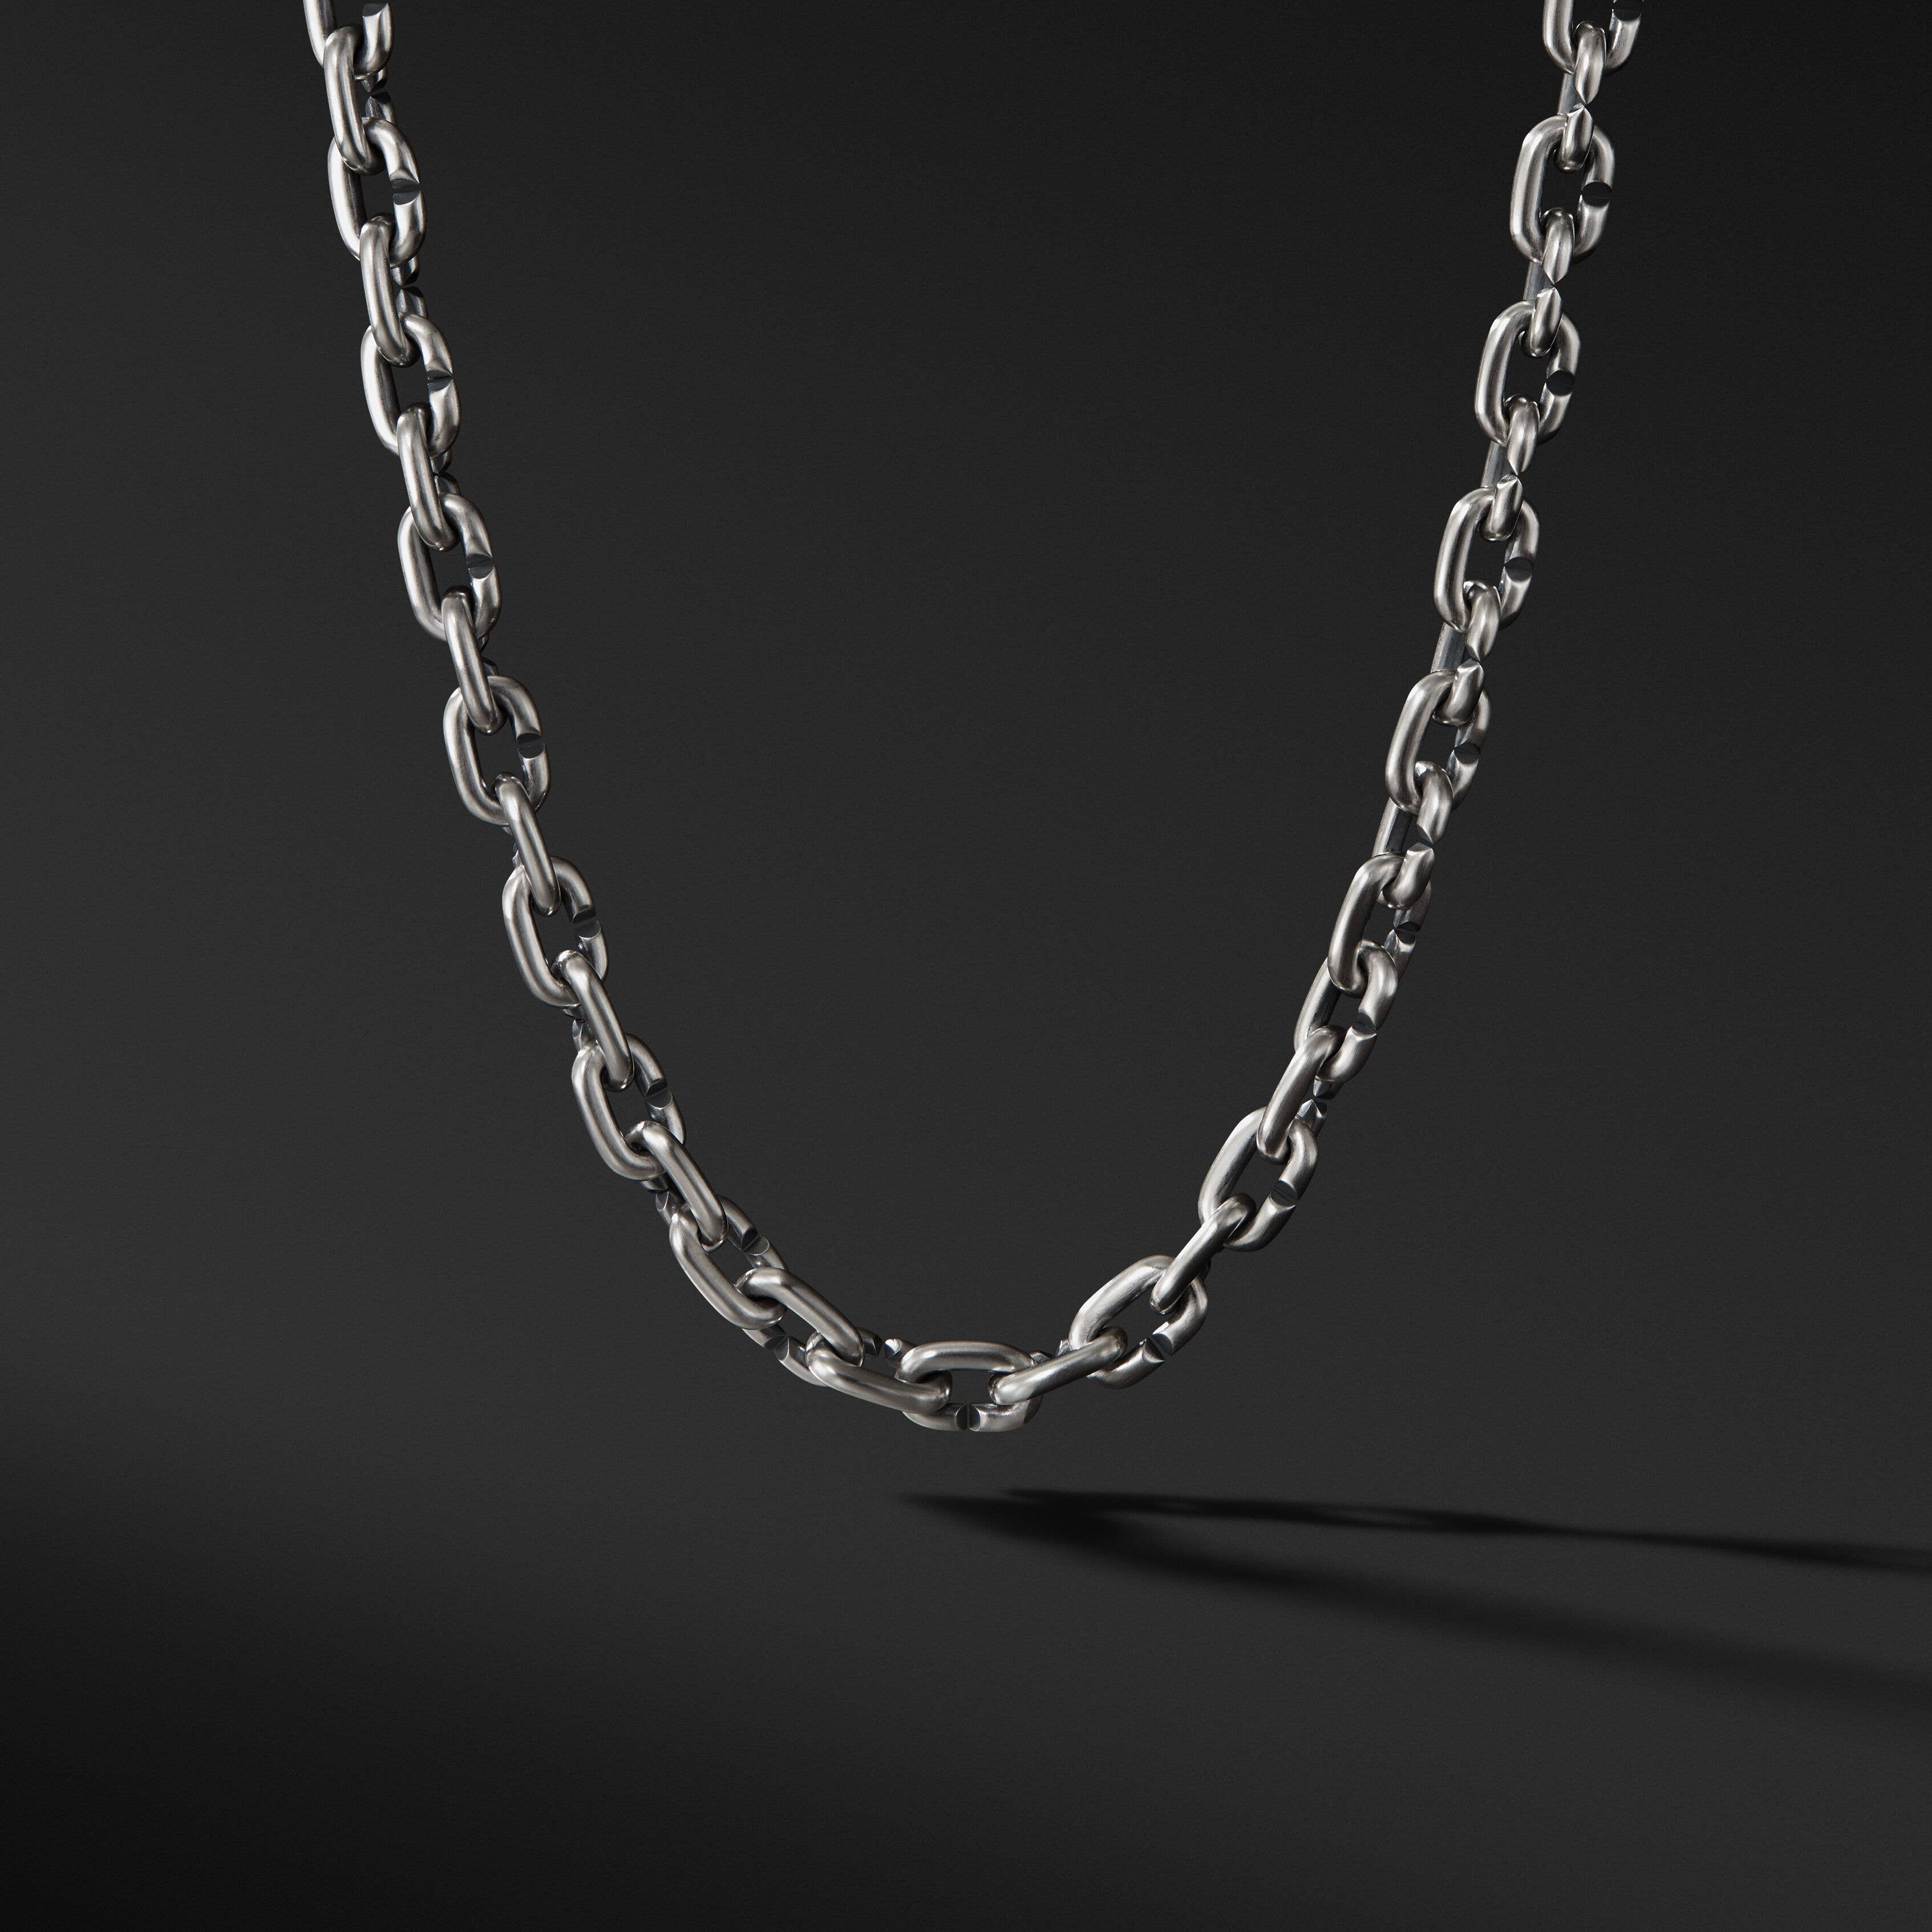 Chain Links Necklace